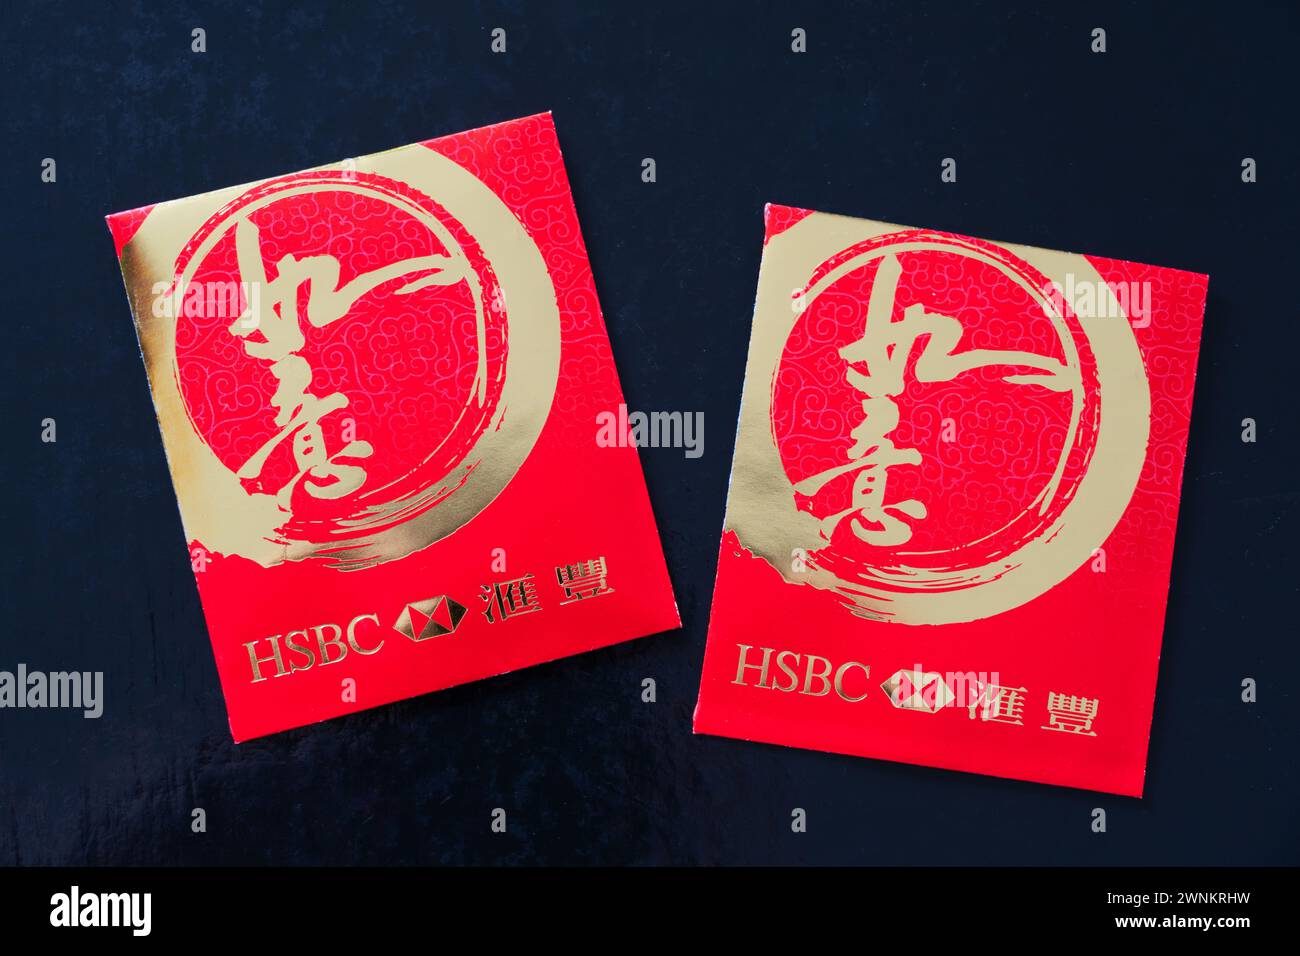 Chinese New Year red envelope (hongbao in Mandarin), containing money. Chinese characters read 'good wishes' or 'as one wants'. Sponsored by HSBC Stock Photo